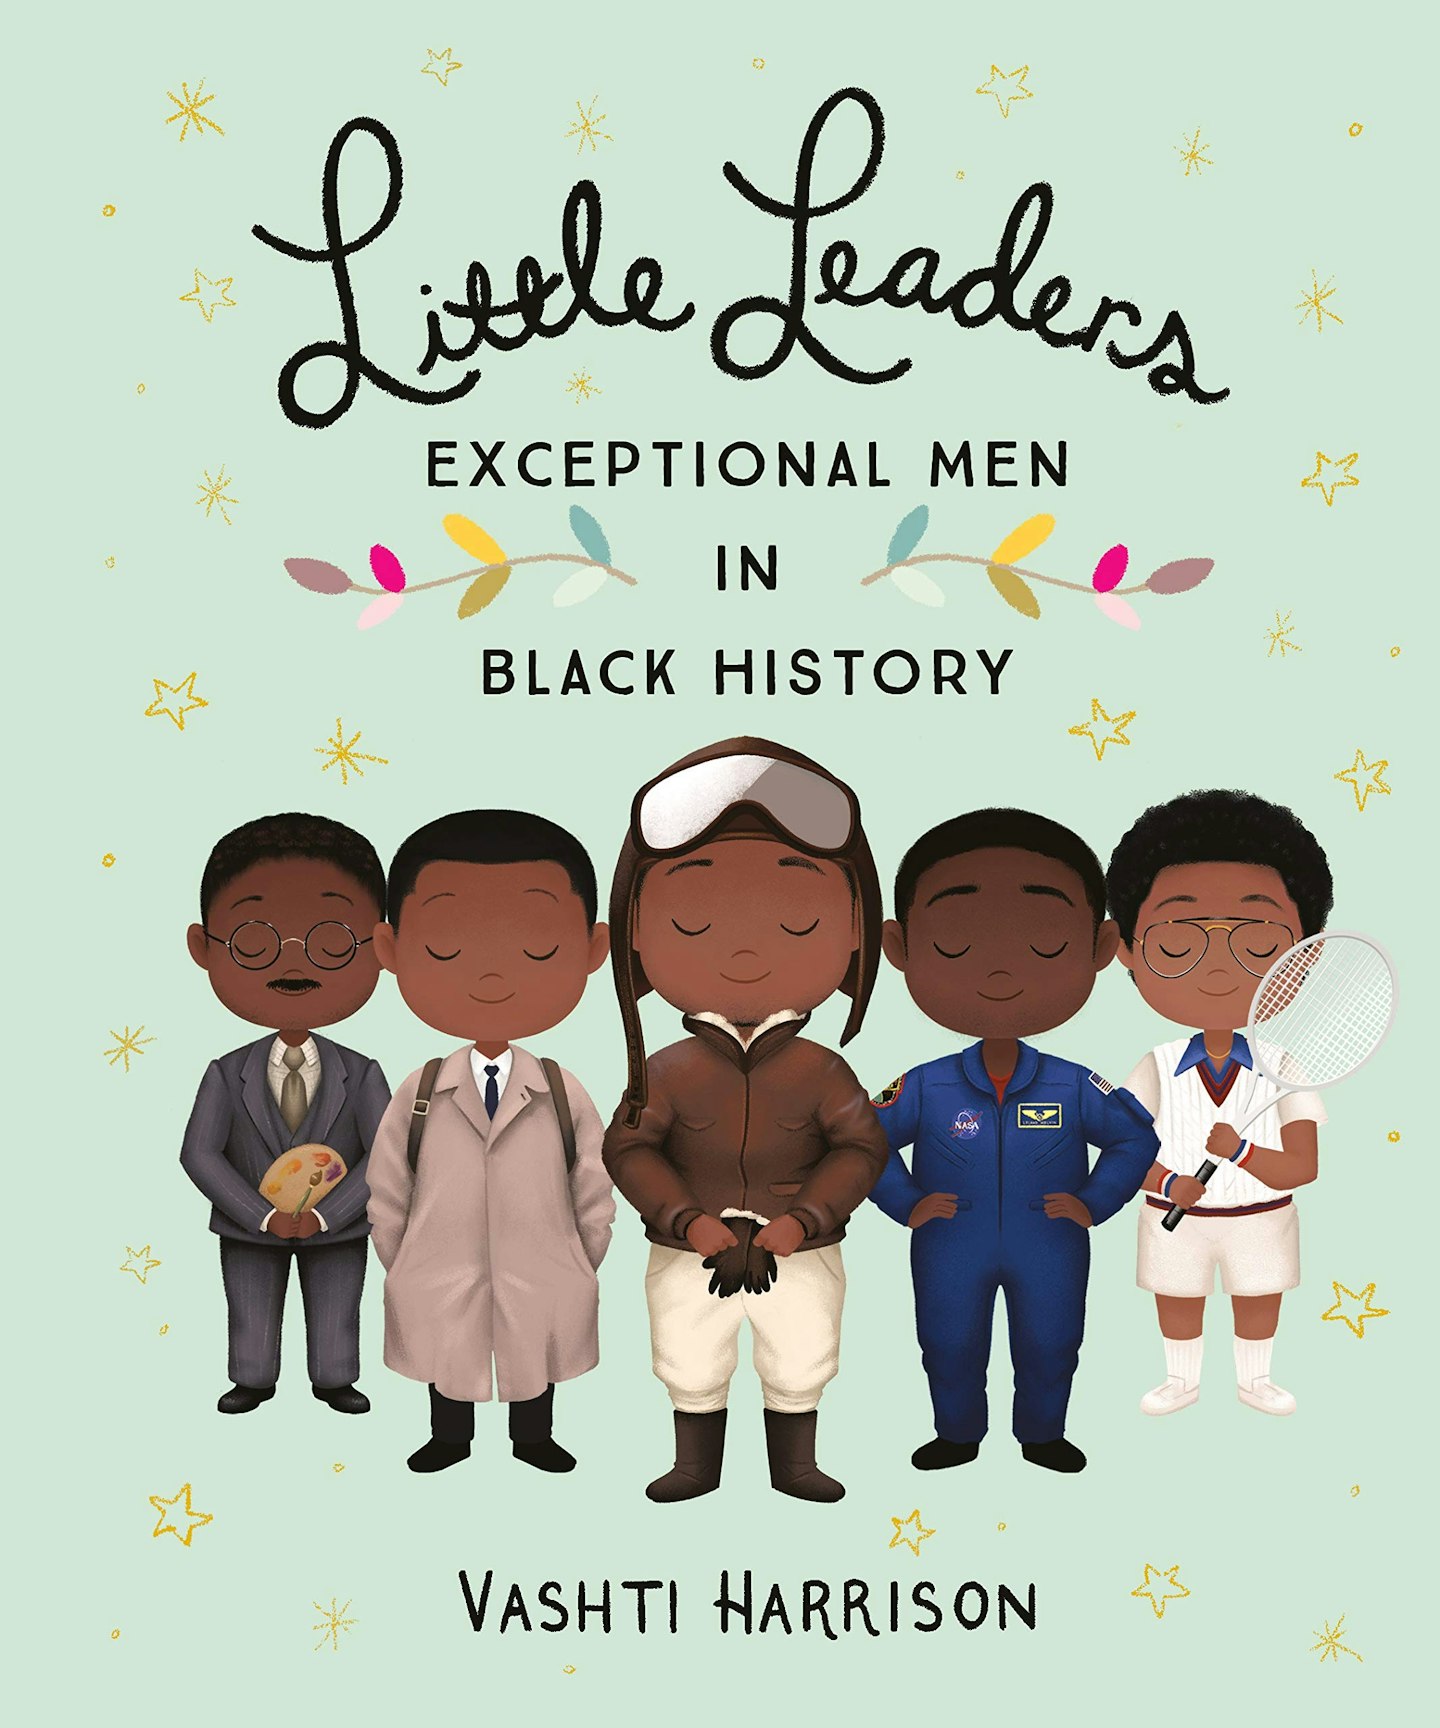 10 Books For Different Ages If You're Trying To Make Sure Your Child's Bookshelf Is Diverse